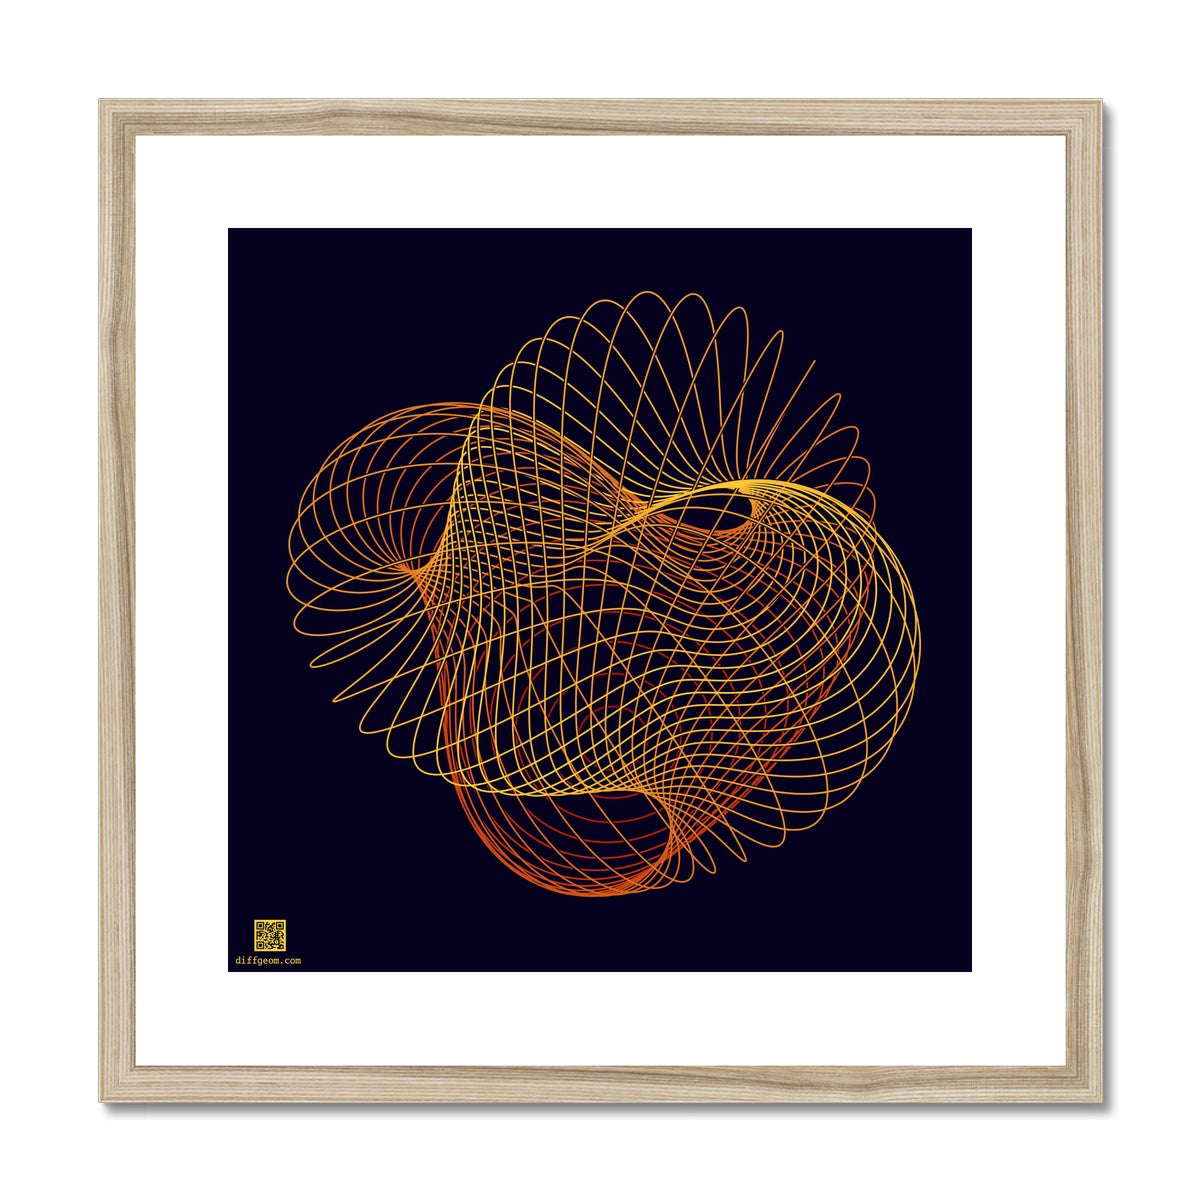 Projective Plane, Autumn Framed & Mounted Print